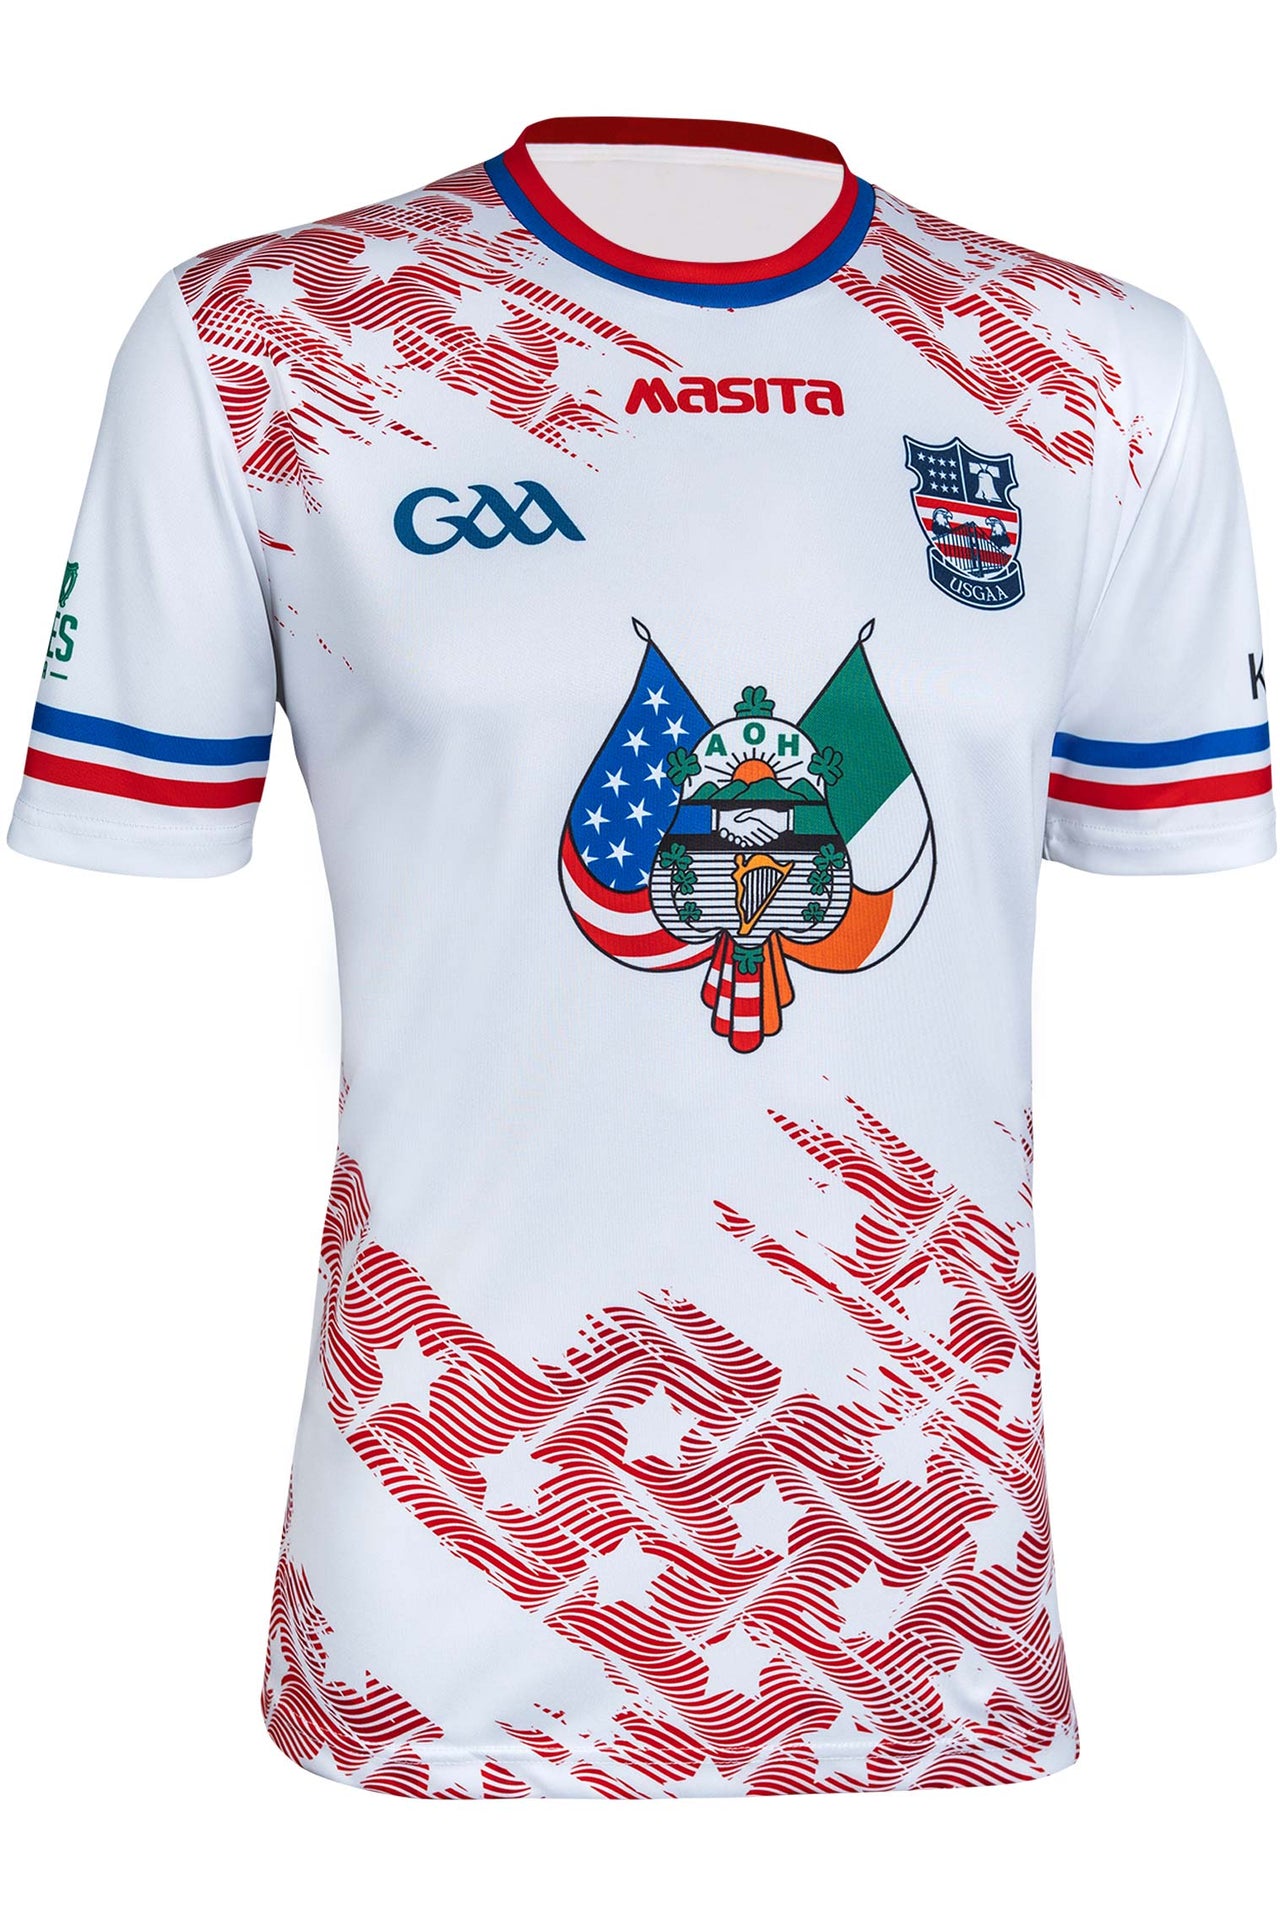 USGAA County Away Jersey Player Fit Adult